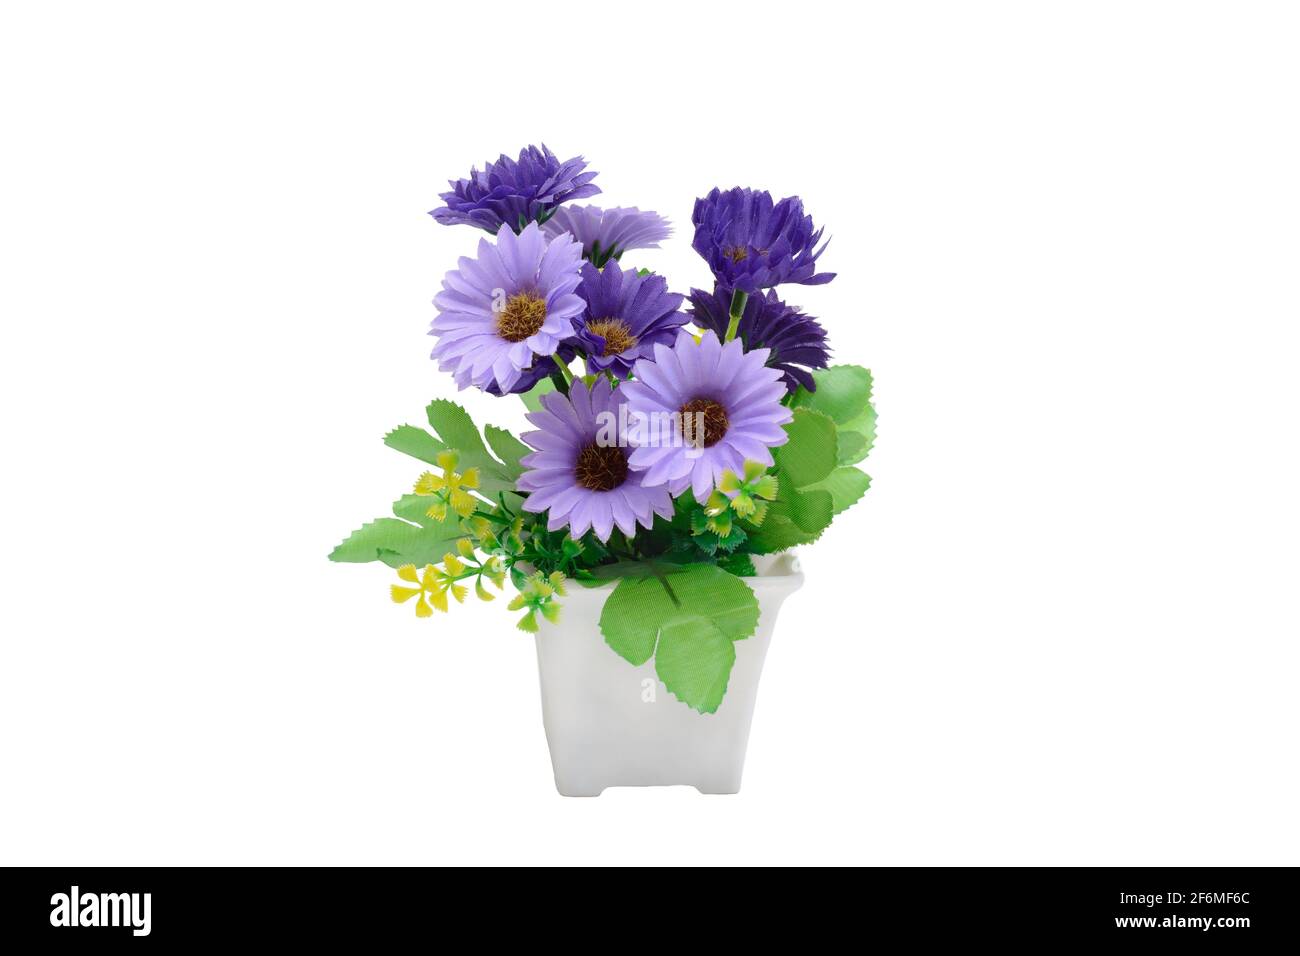 Potted plant Gerbera purple. Piece of interior. Isolated on white background. Stock Photo